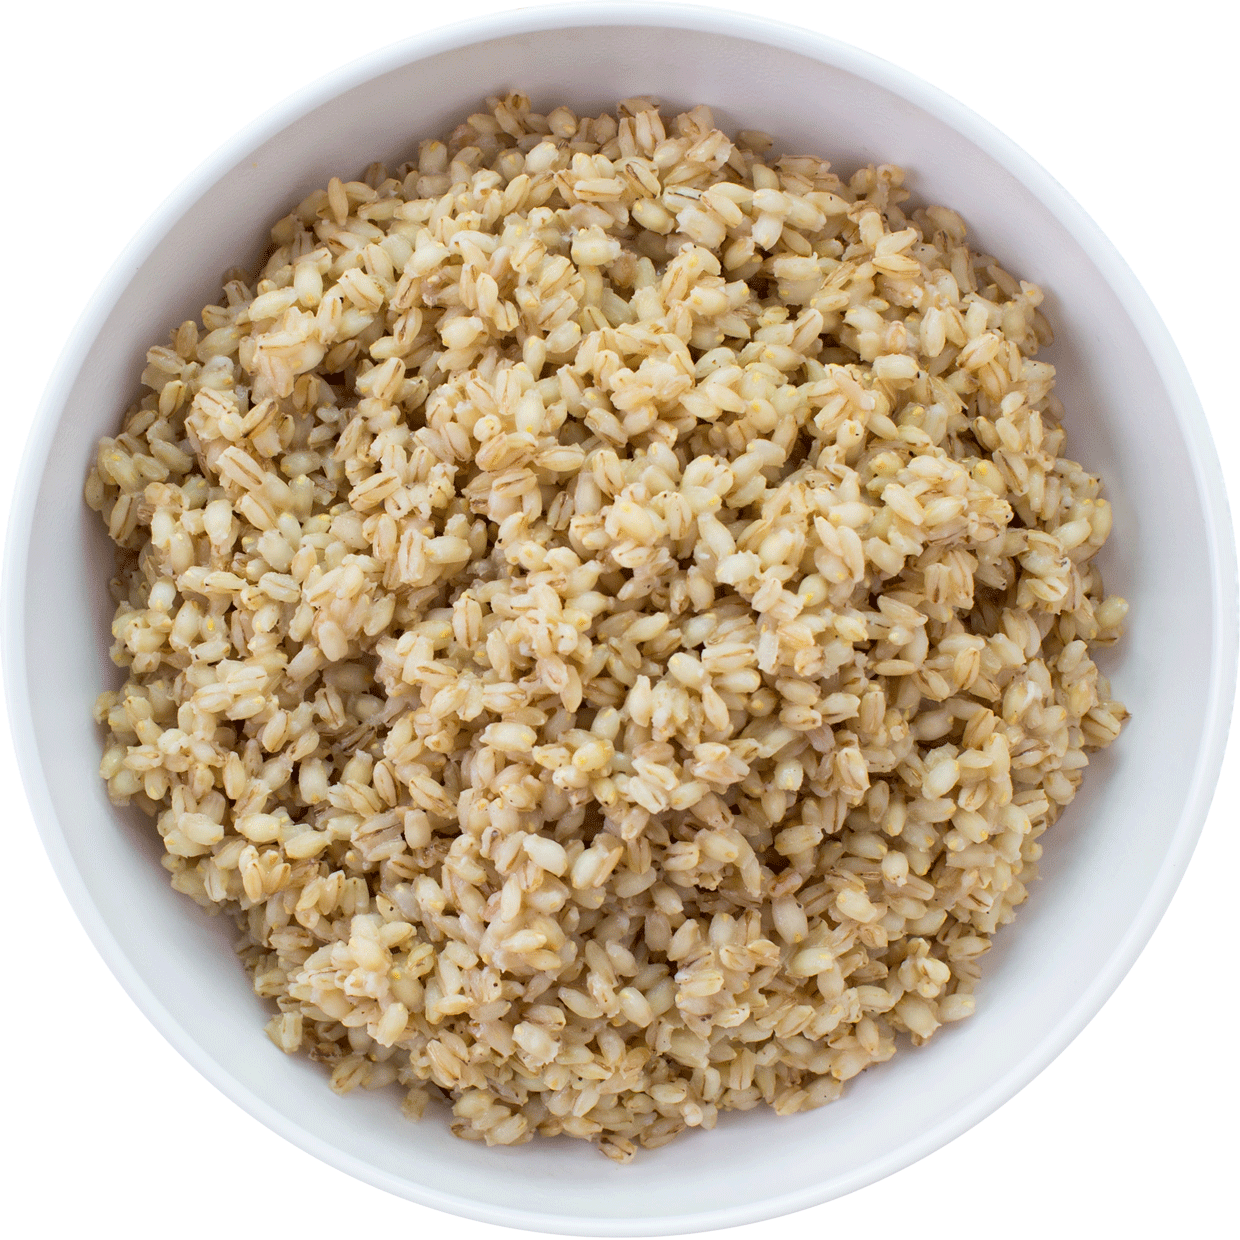 rice clipart cooked rice